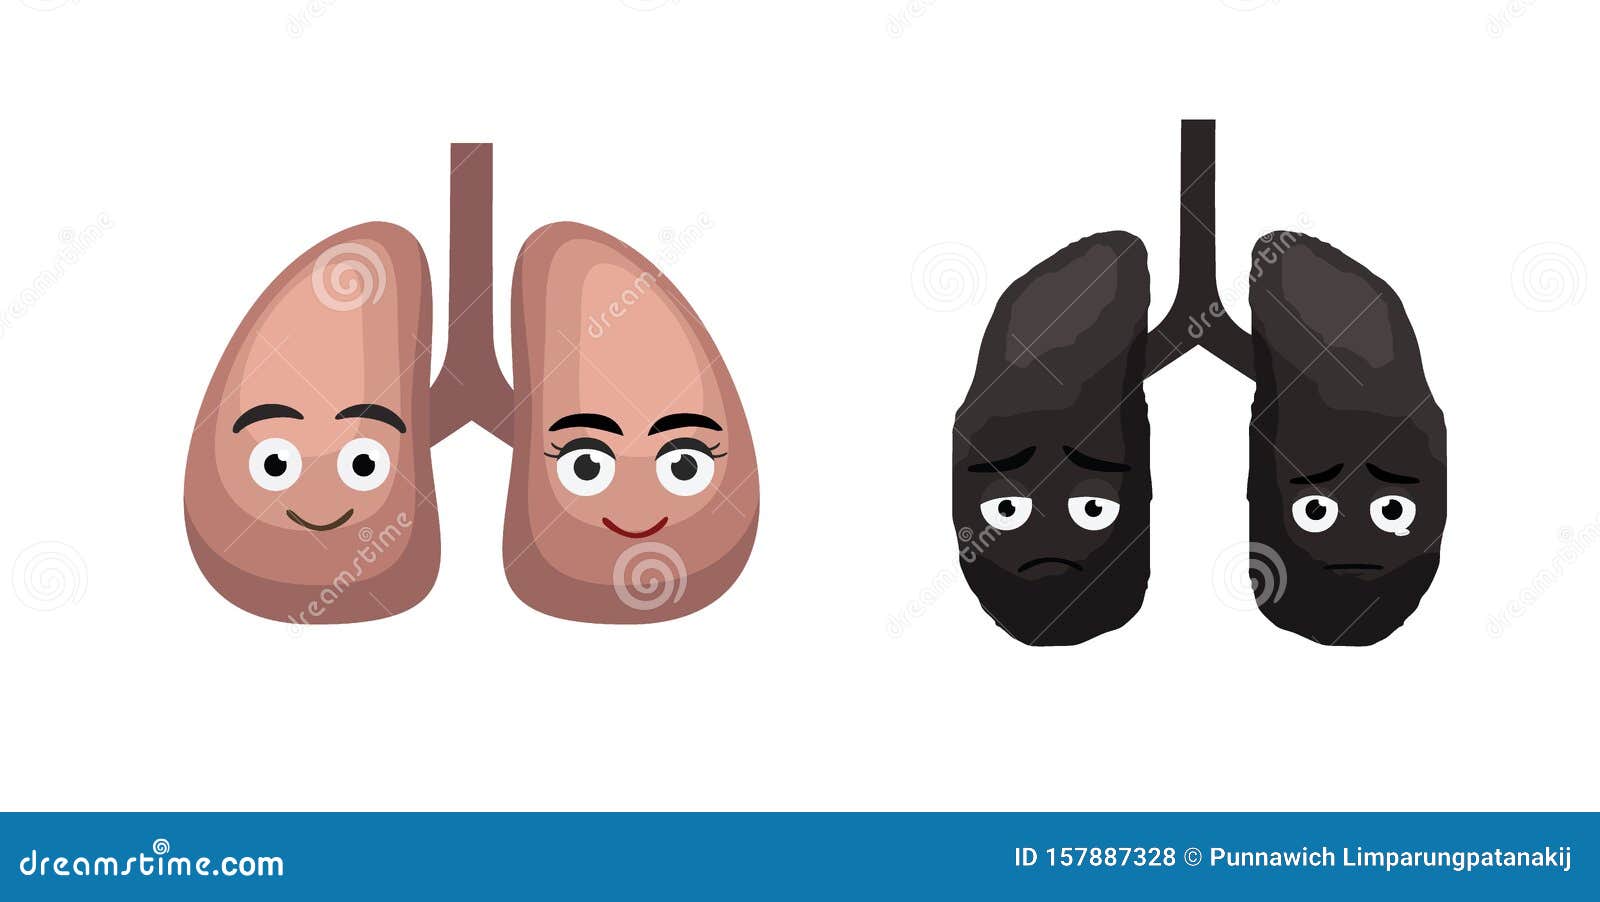 Healthy Smokey Lung Cute Cartoon Vector Stock Vector - Illustration of  alcoholism, lung: 157887328